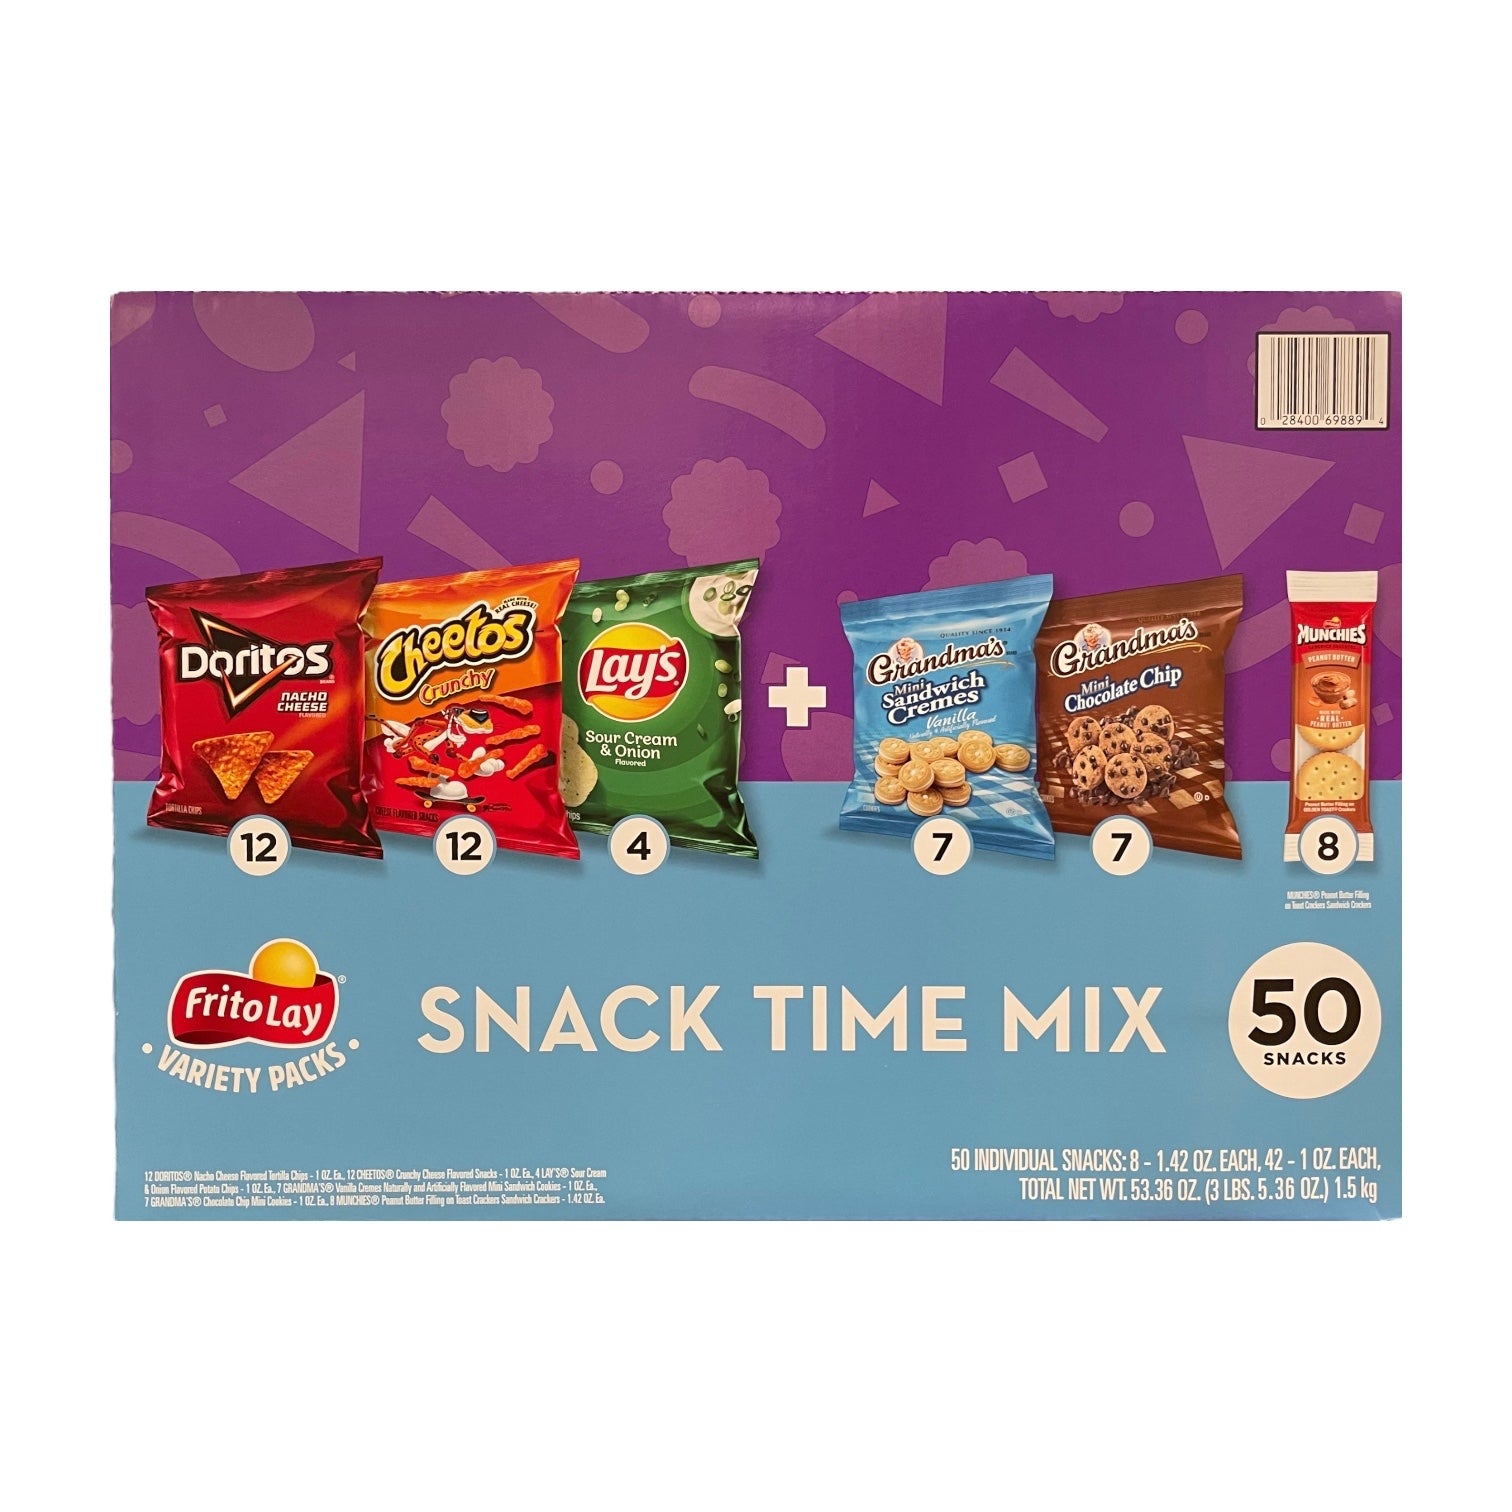 Snack Time Mix by Frito Lay, 50 Pack